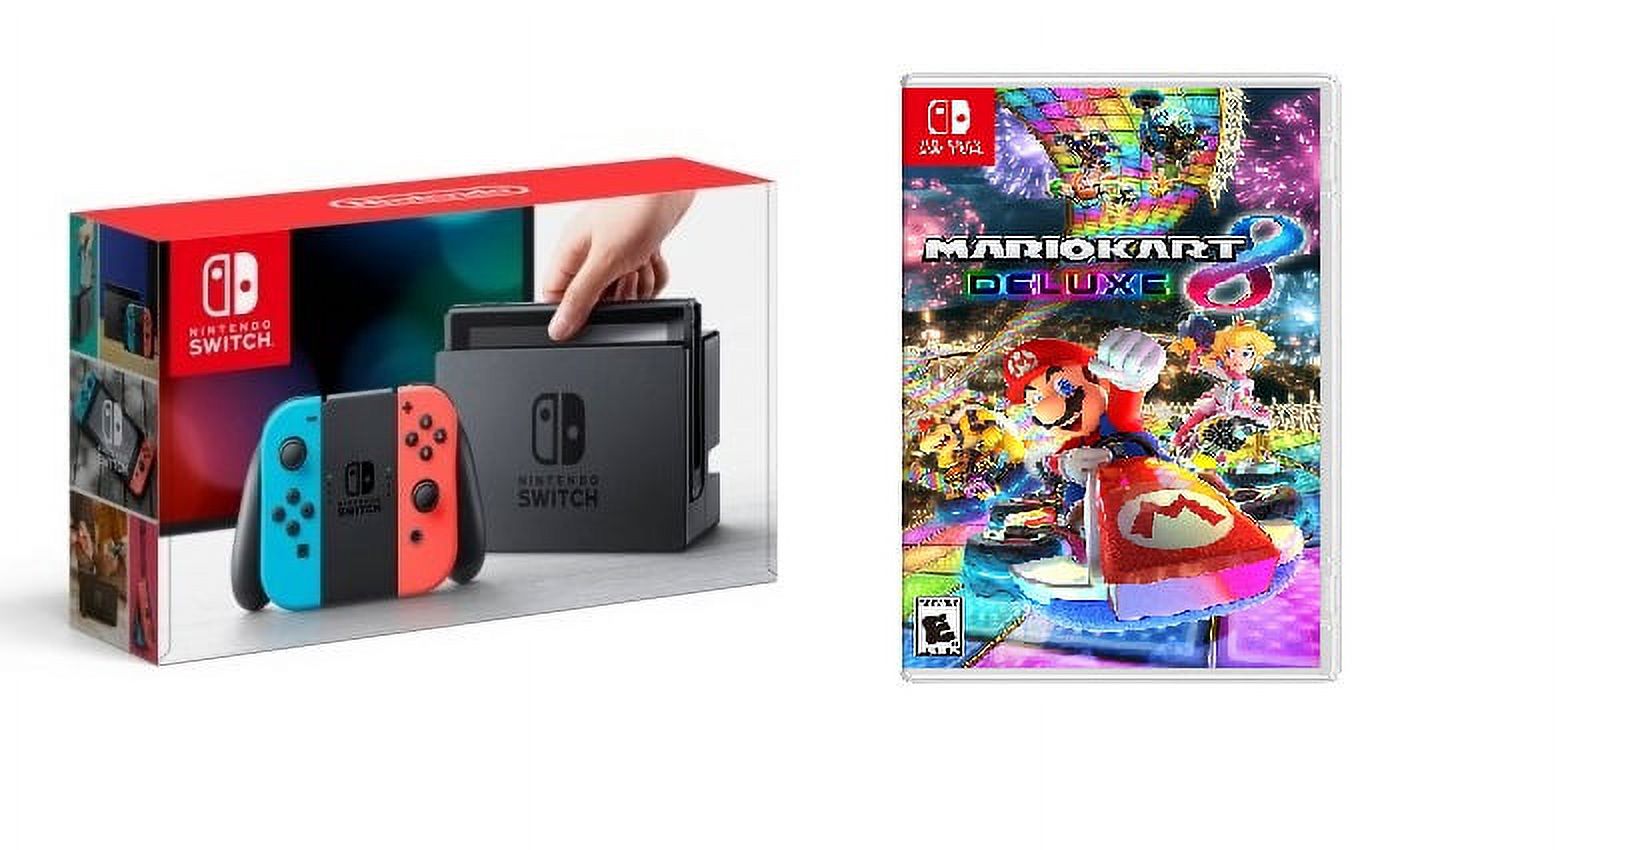 Nintendo Switch Gaming Console Neon Blue and Neon Red Joy-Con Bundle with Mario Kart Deluxe 8 - image 1 of 4